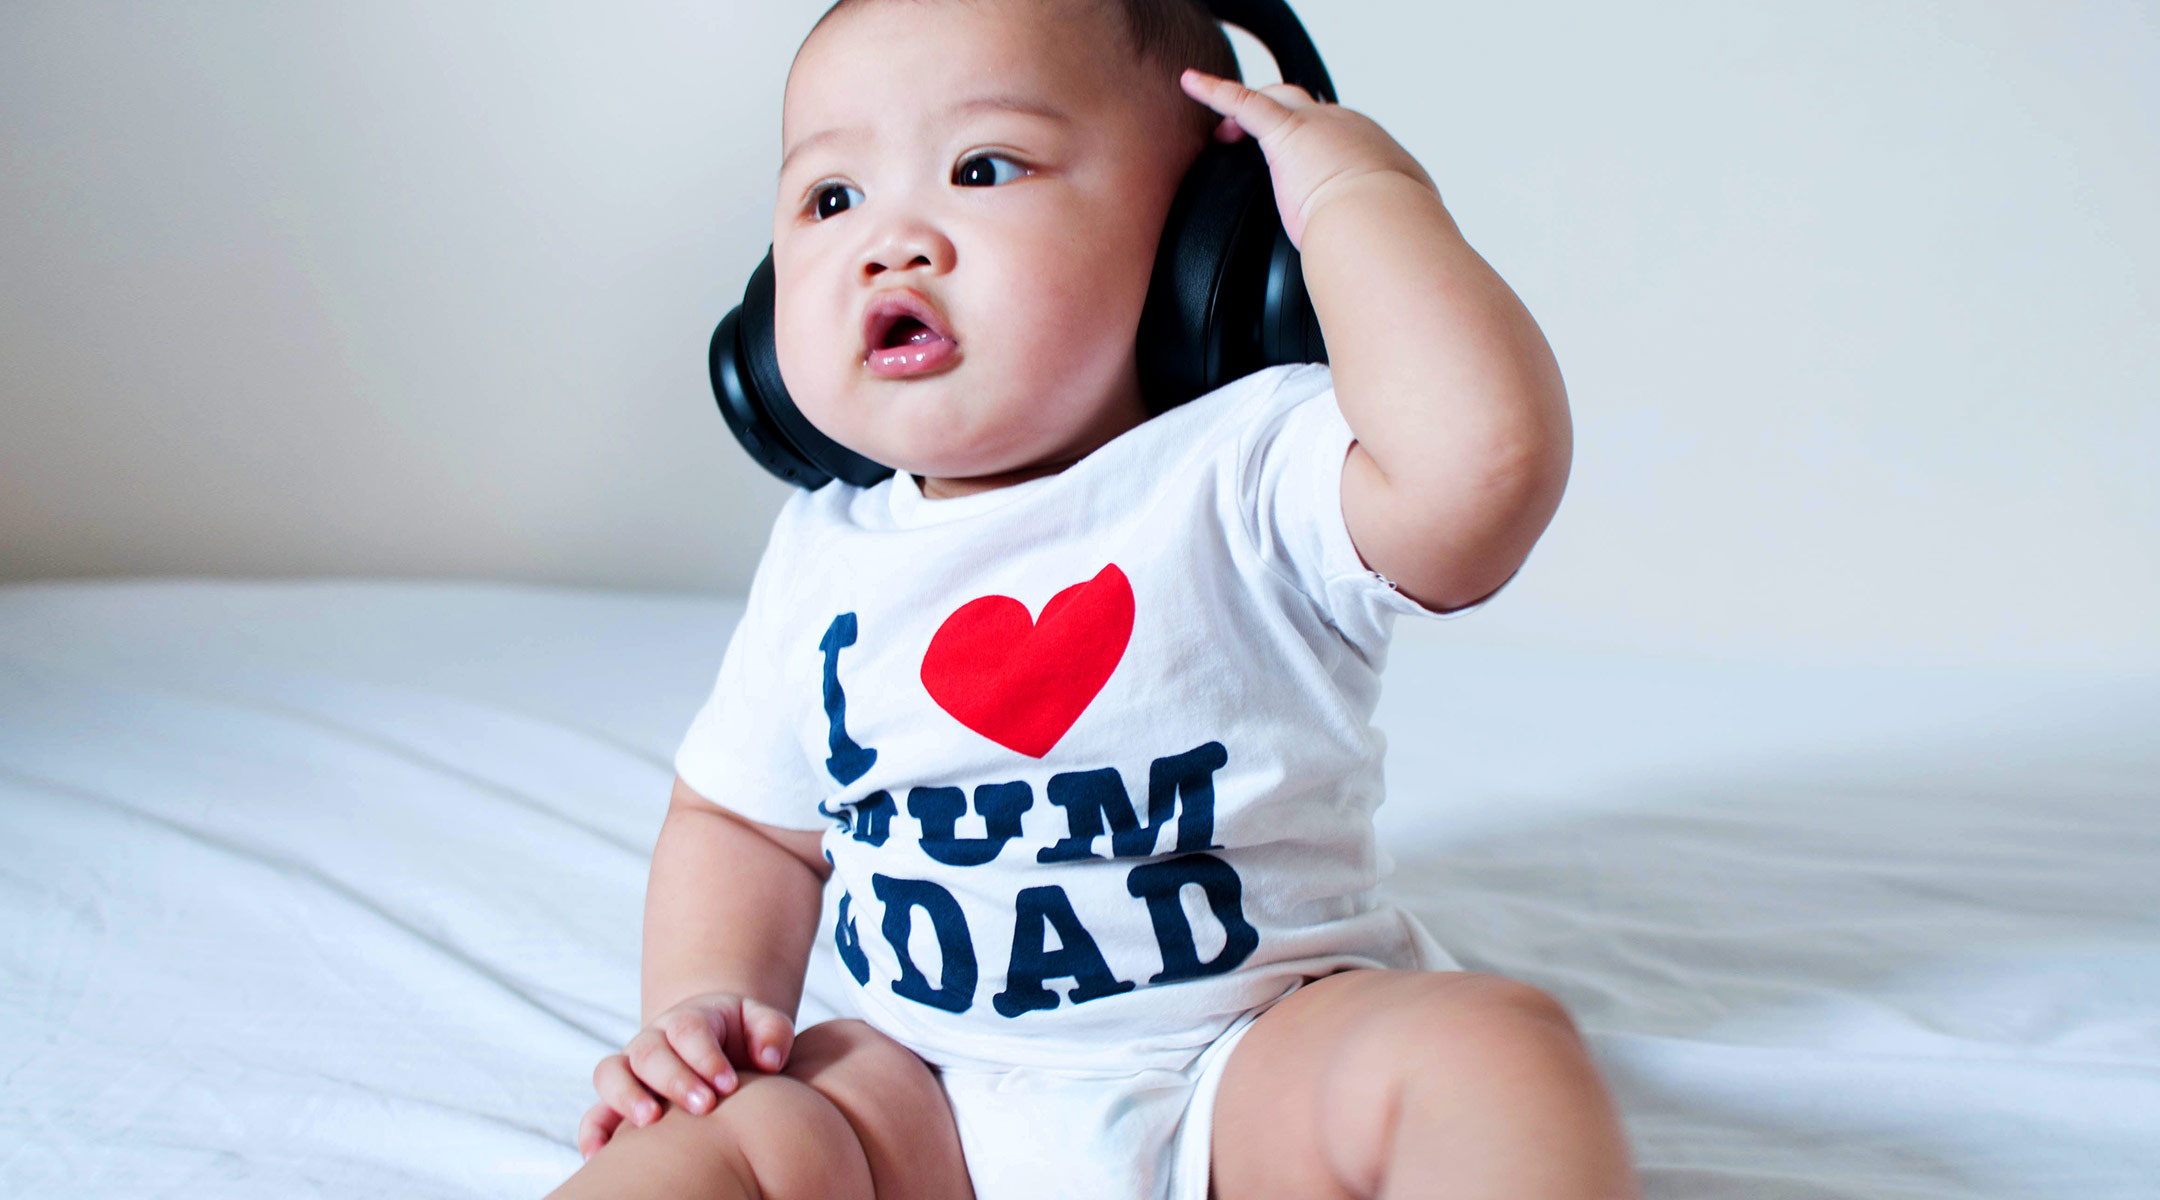 baby listening to music with headphones